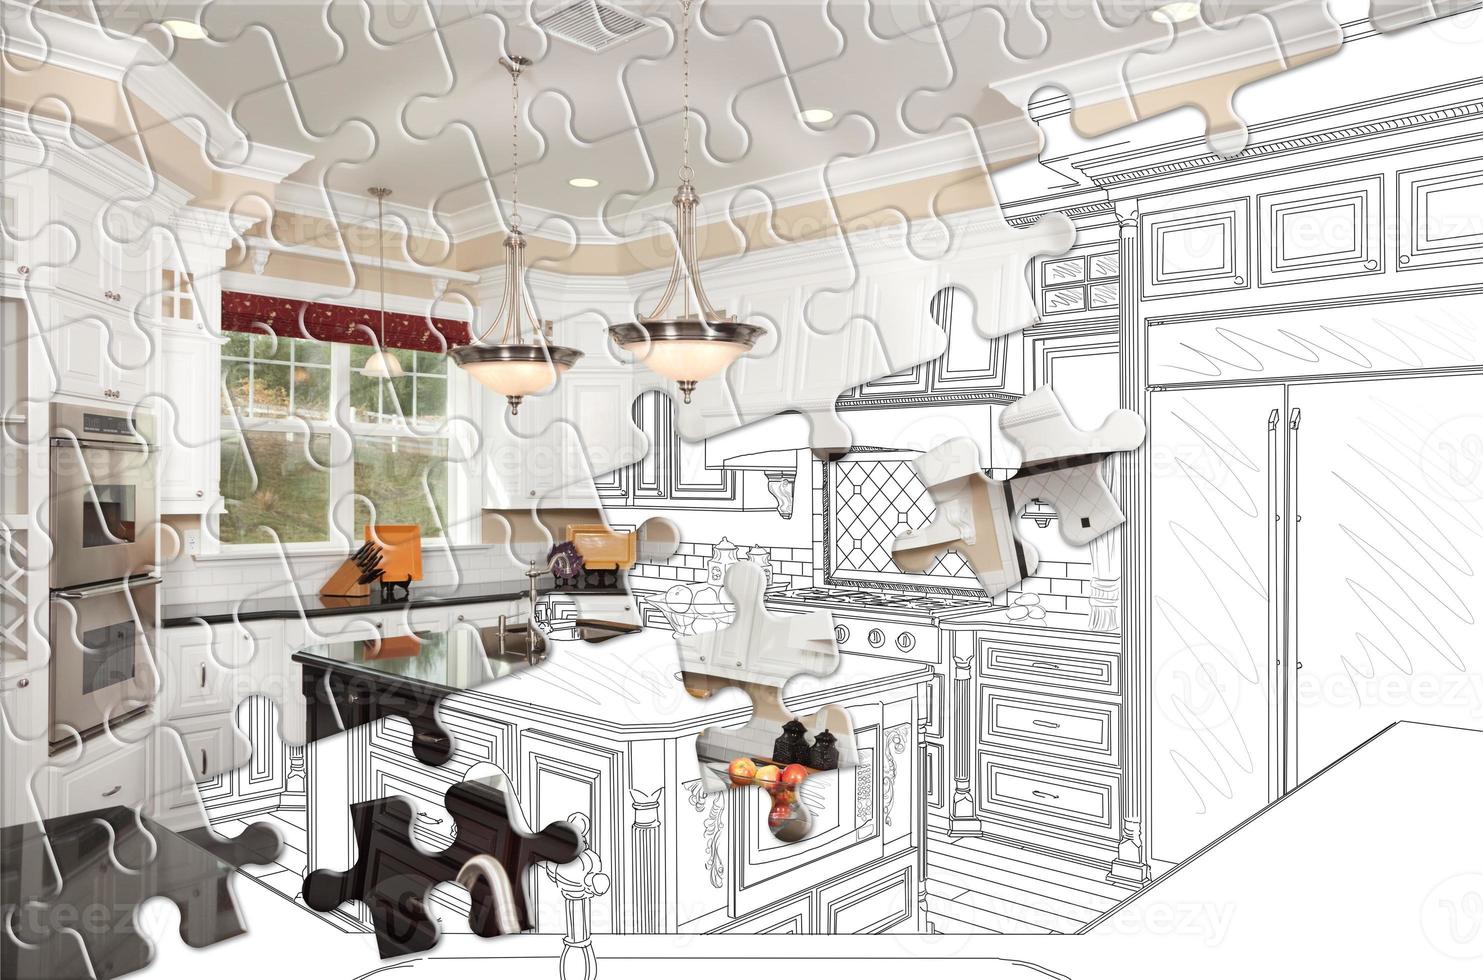 Puzzle Pieces Fitting Together Revealing Finished Kitchen Build Over Drawing photo